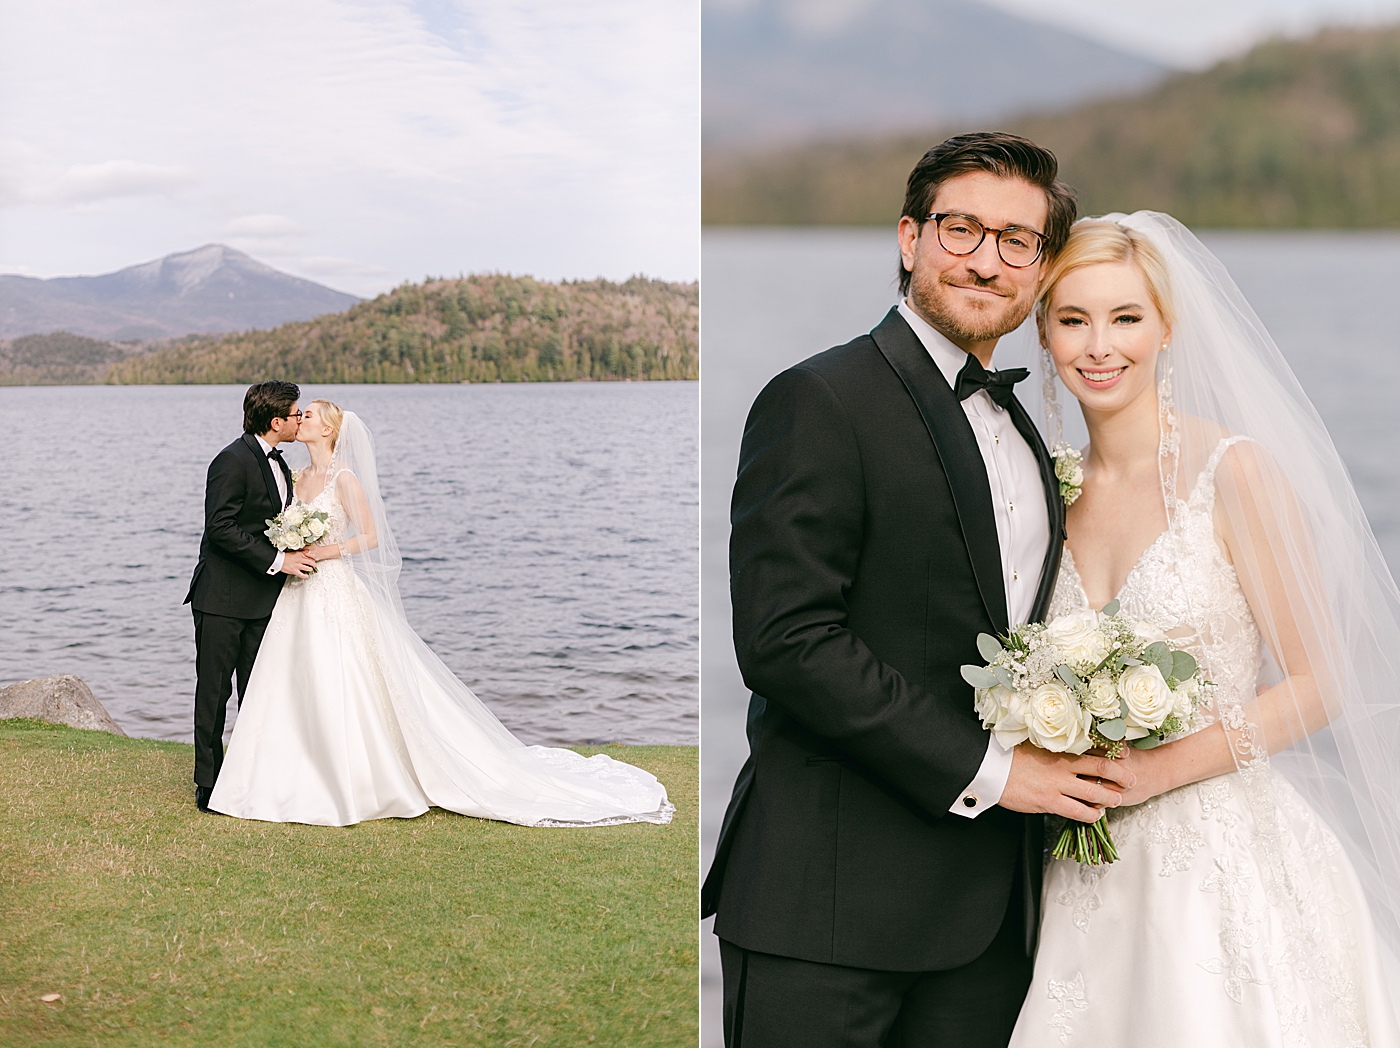 Bride and groom kiss by Lake Placid | Image by Hope Helmuth Photography